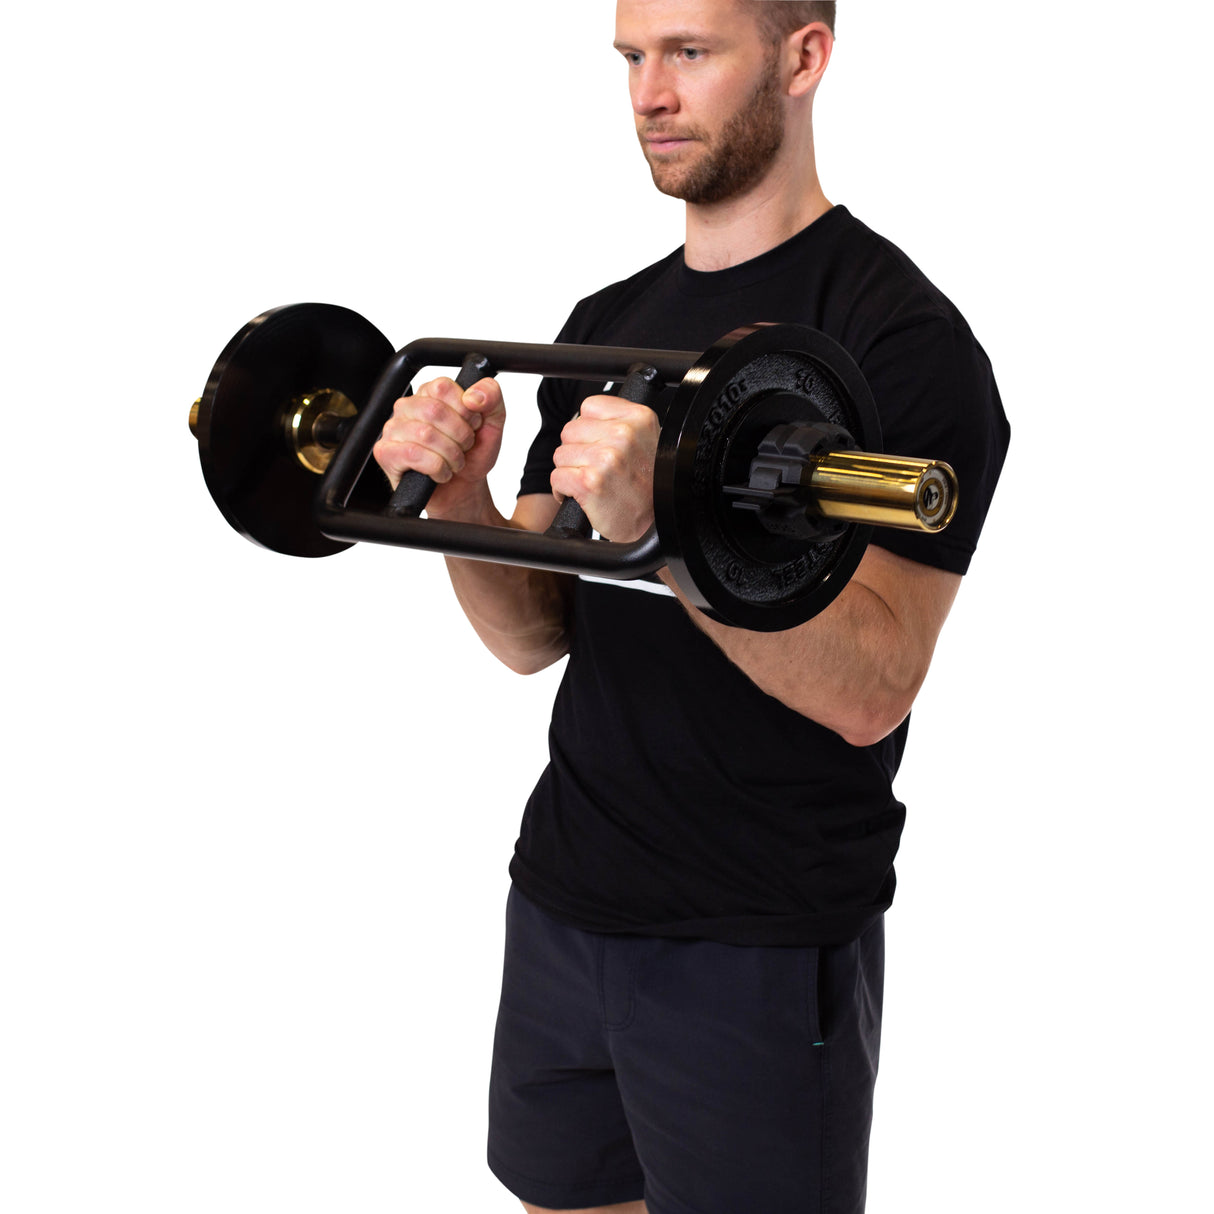 Male Athlete demonstrating Hammer curls using the BoS Tricep Bar